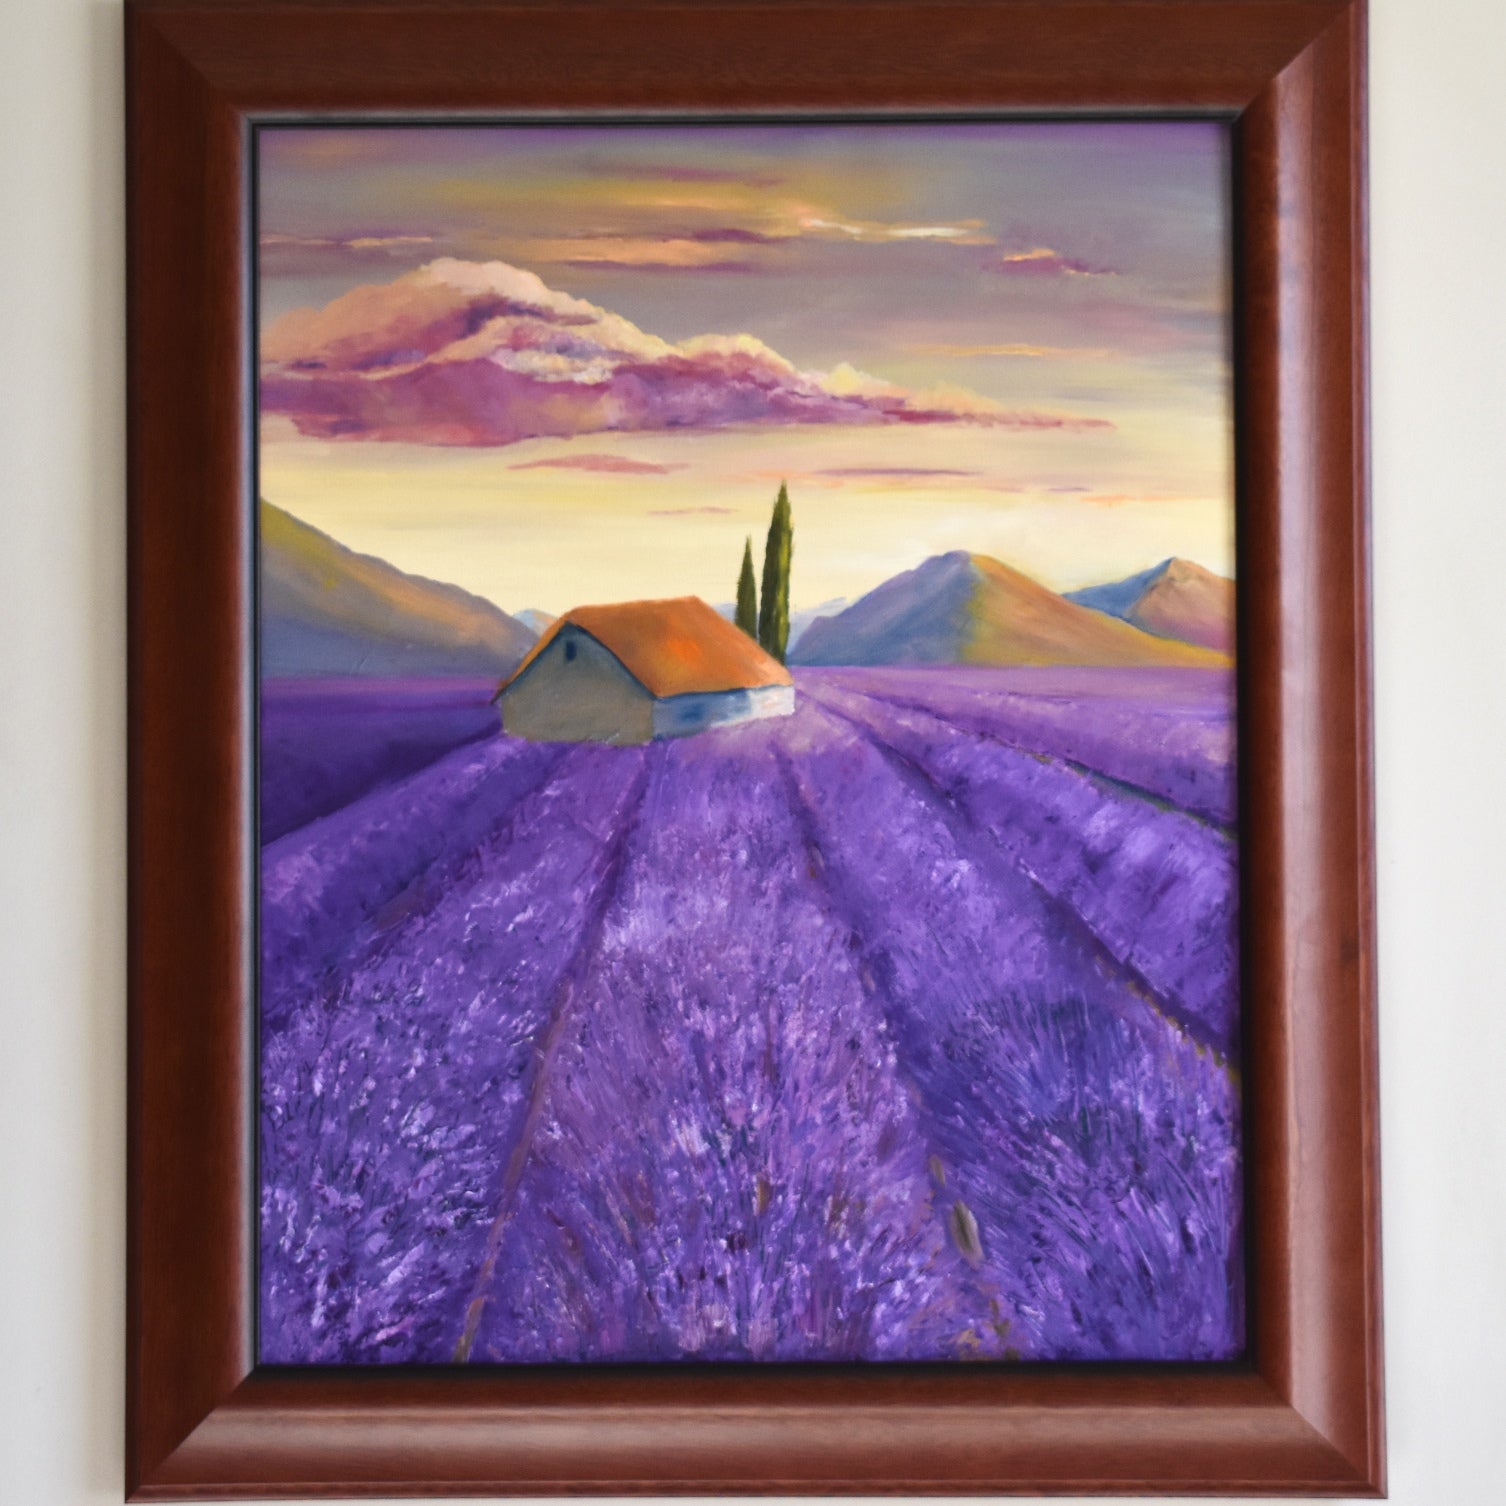 Provence (SOLD)